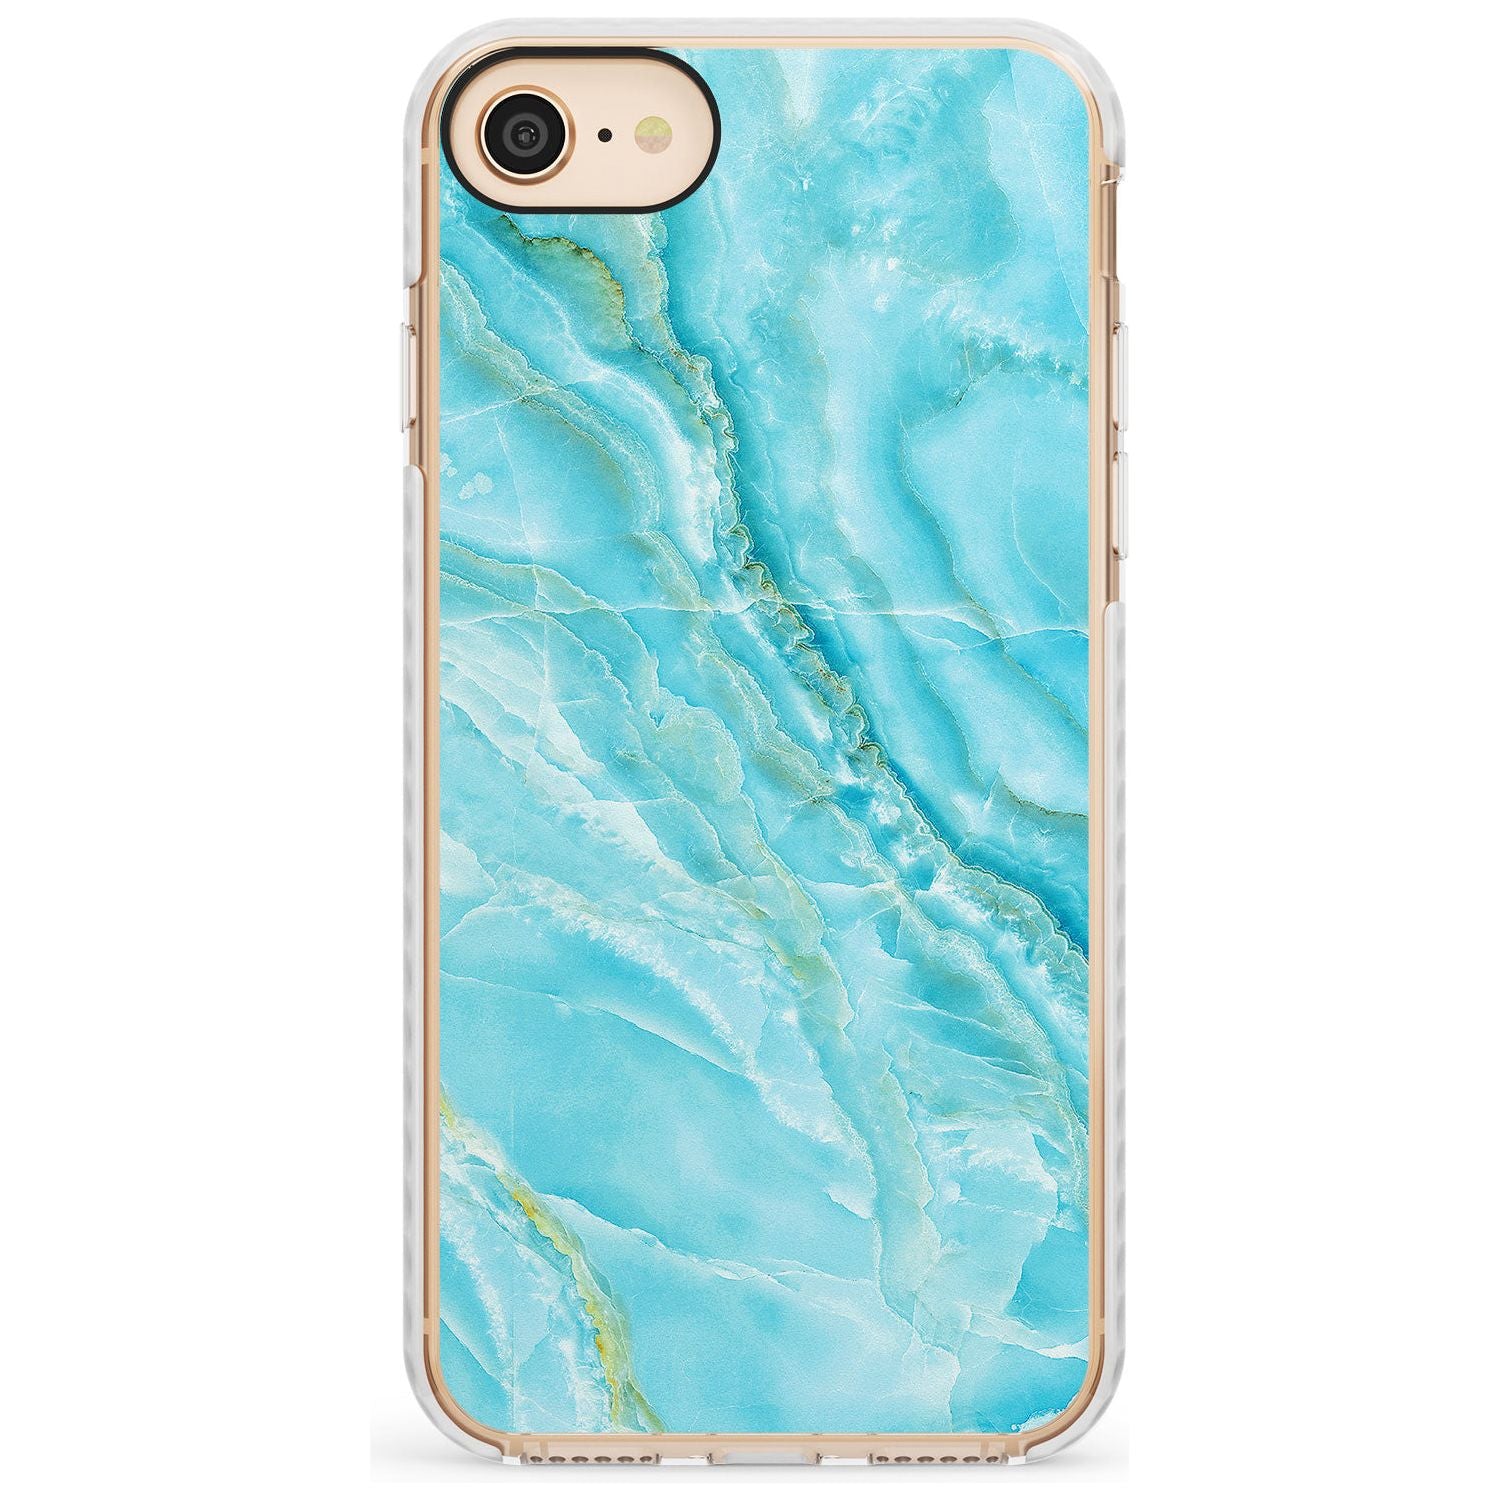 Bright Blue Onyx Marble Texture Slim TPU Phone Case for iPhone SE 8 7 Plus